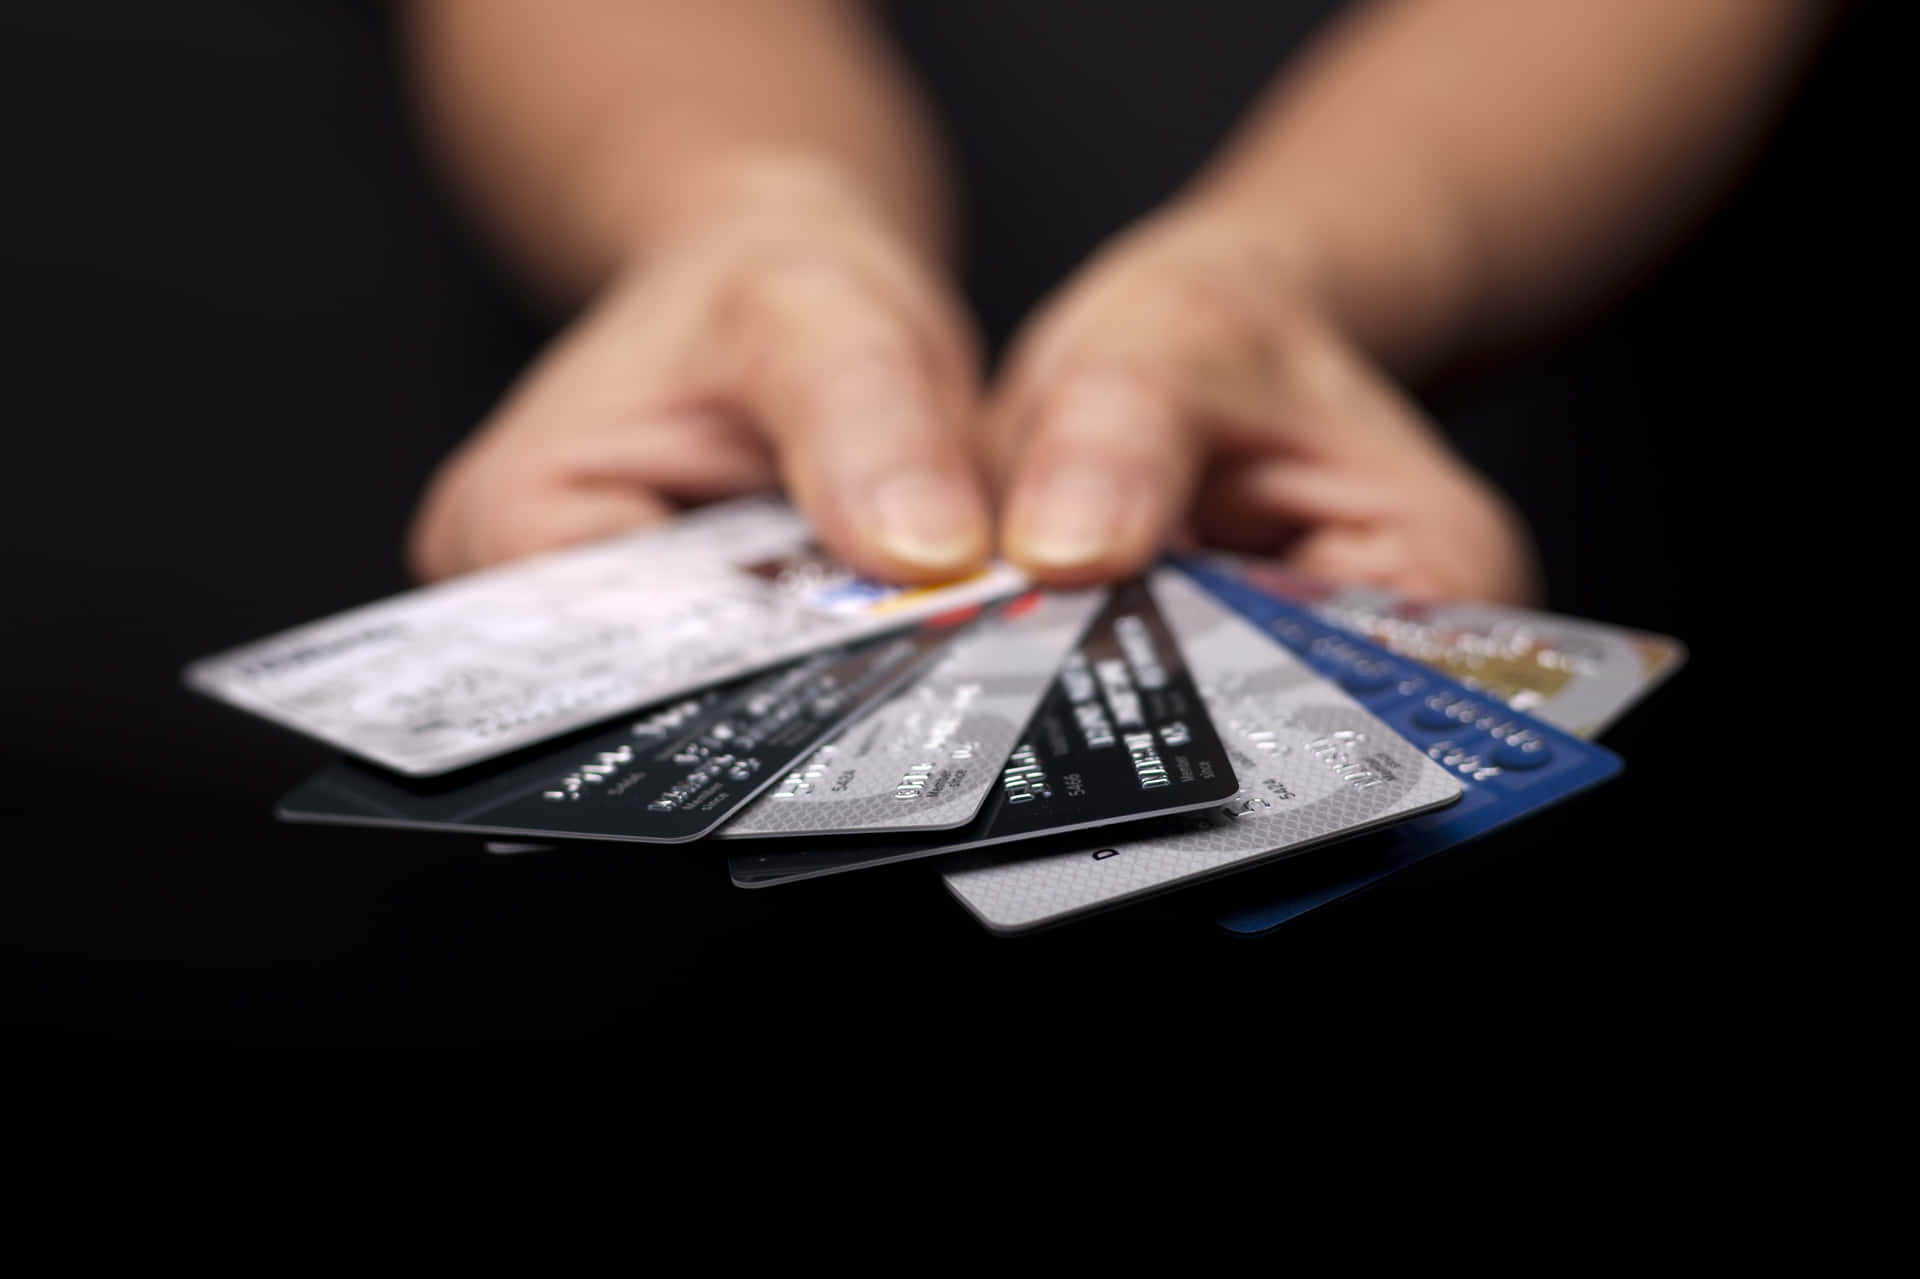 A Woman's Hands Holding Several Credit Cards